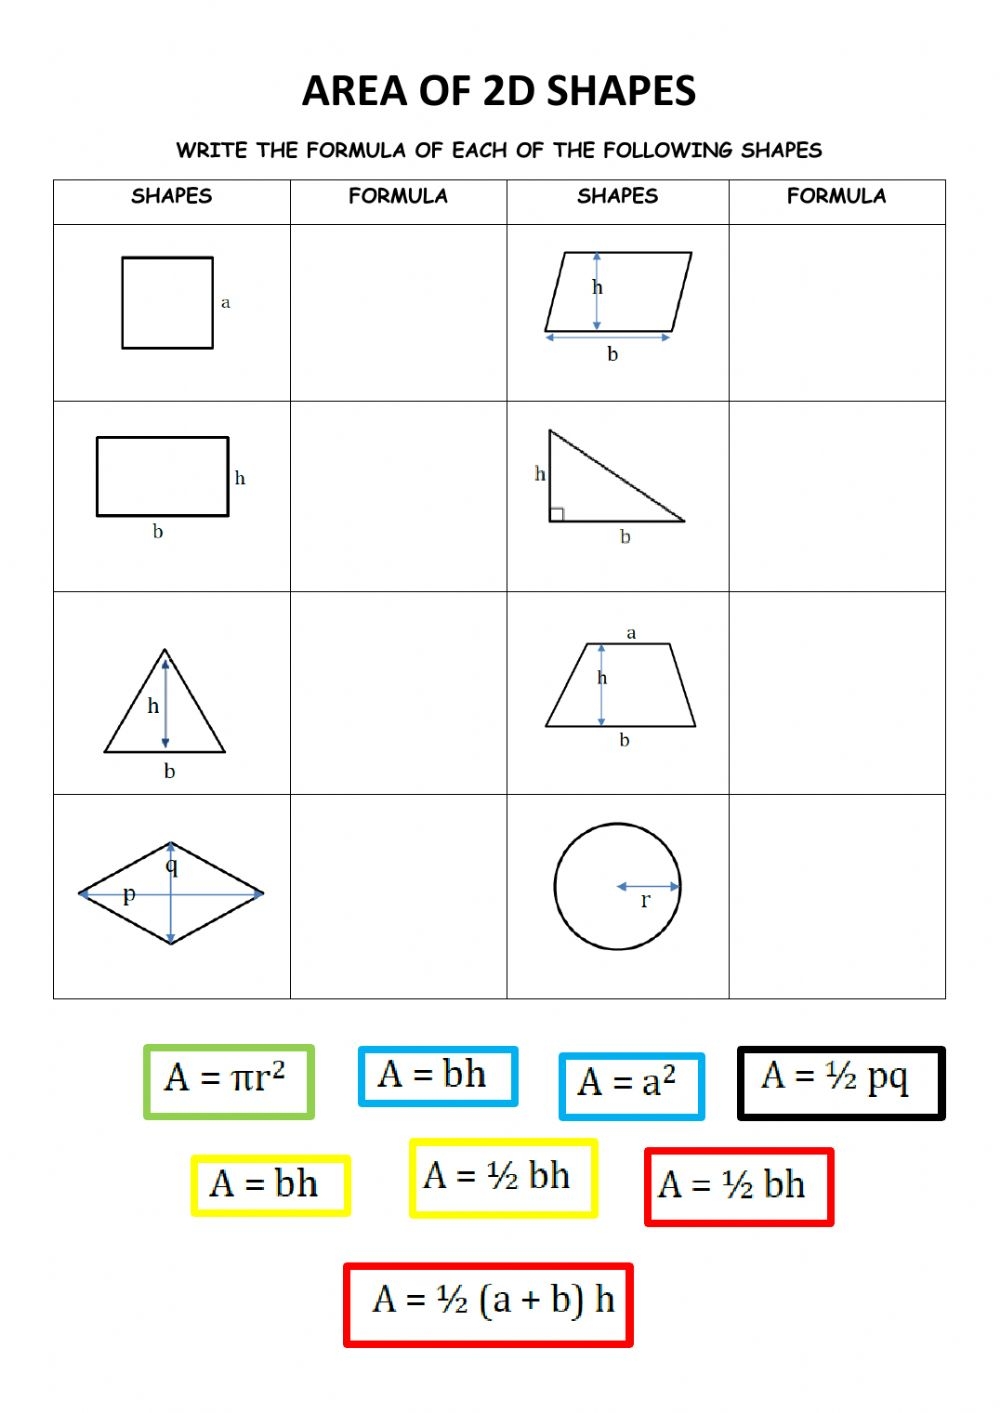 area-of-2d-shapes-worksheet-math-worksheet-answers